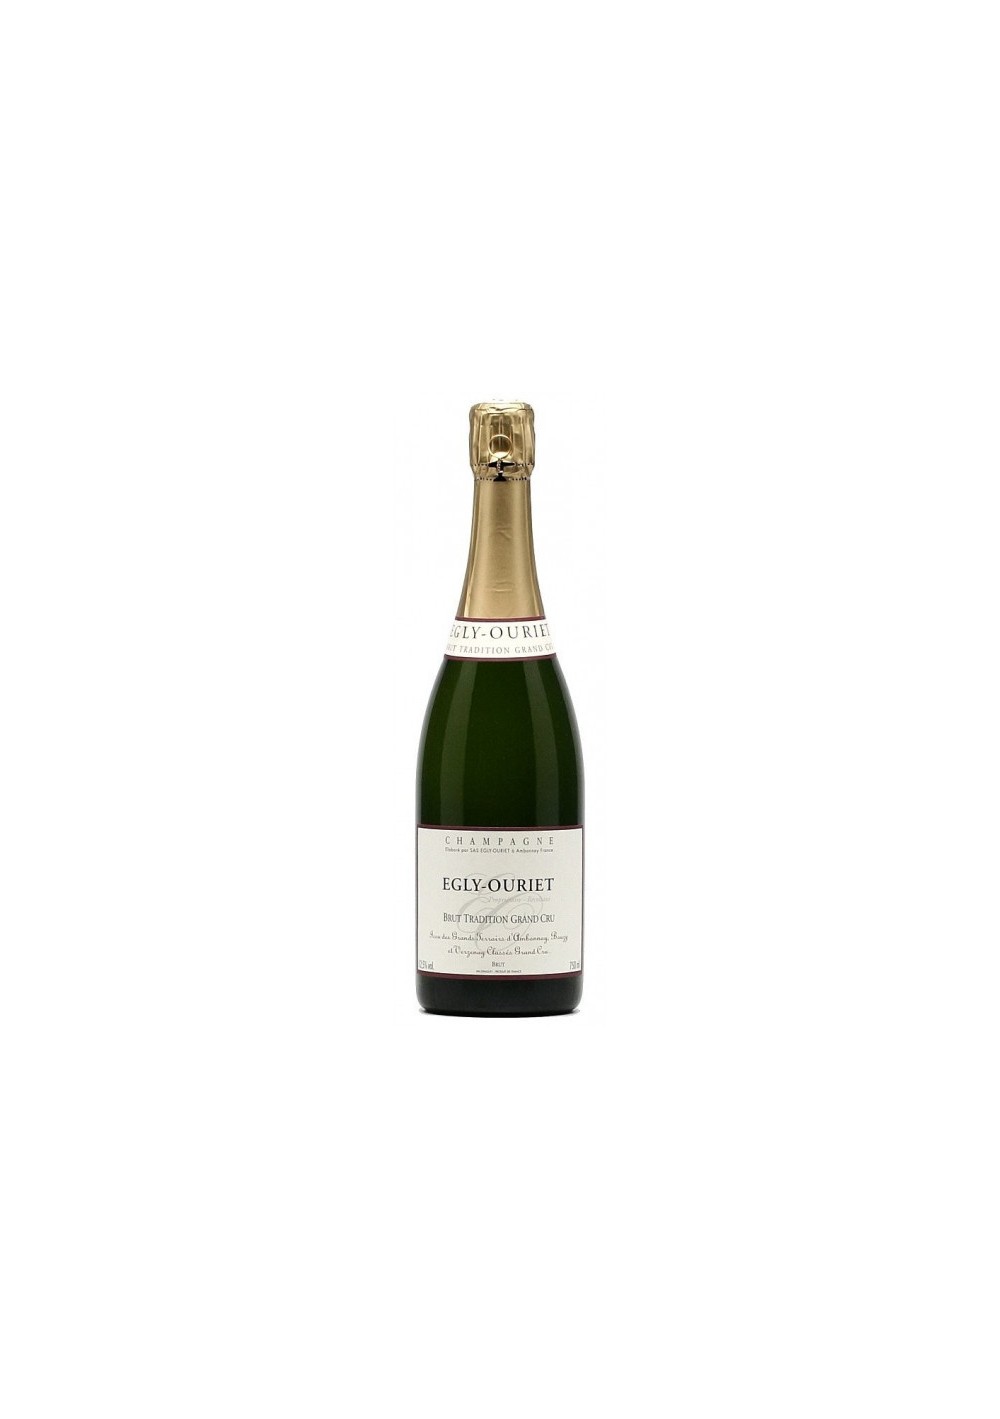 Egly-Ouriet Brut Tradition Champagne Grand Cru